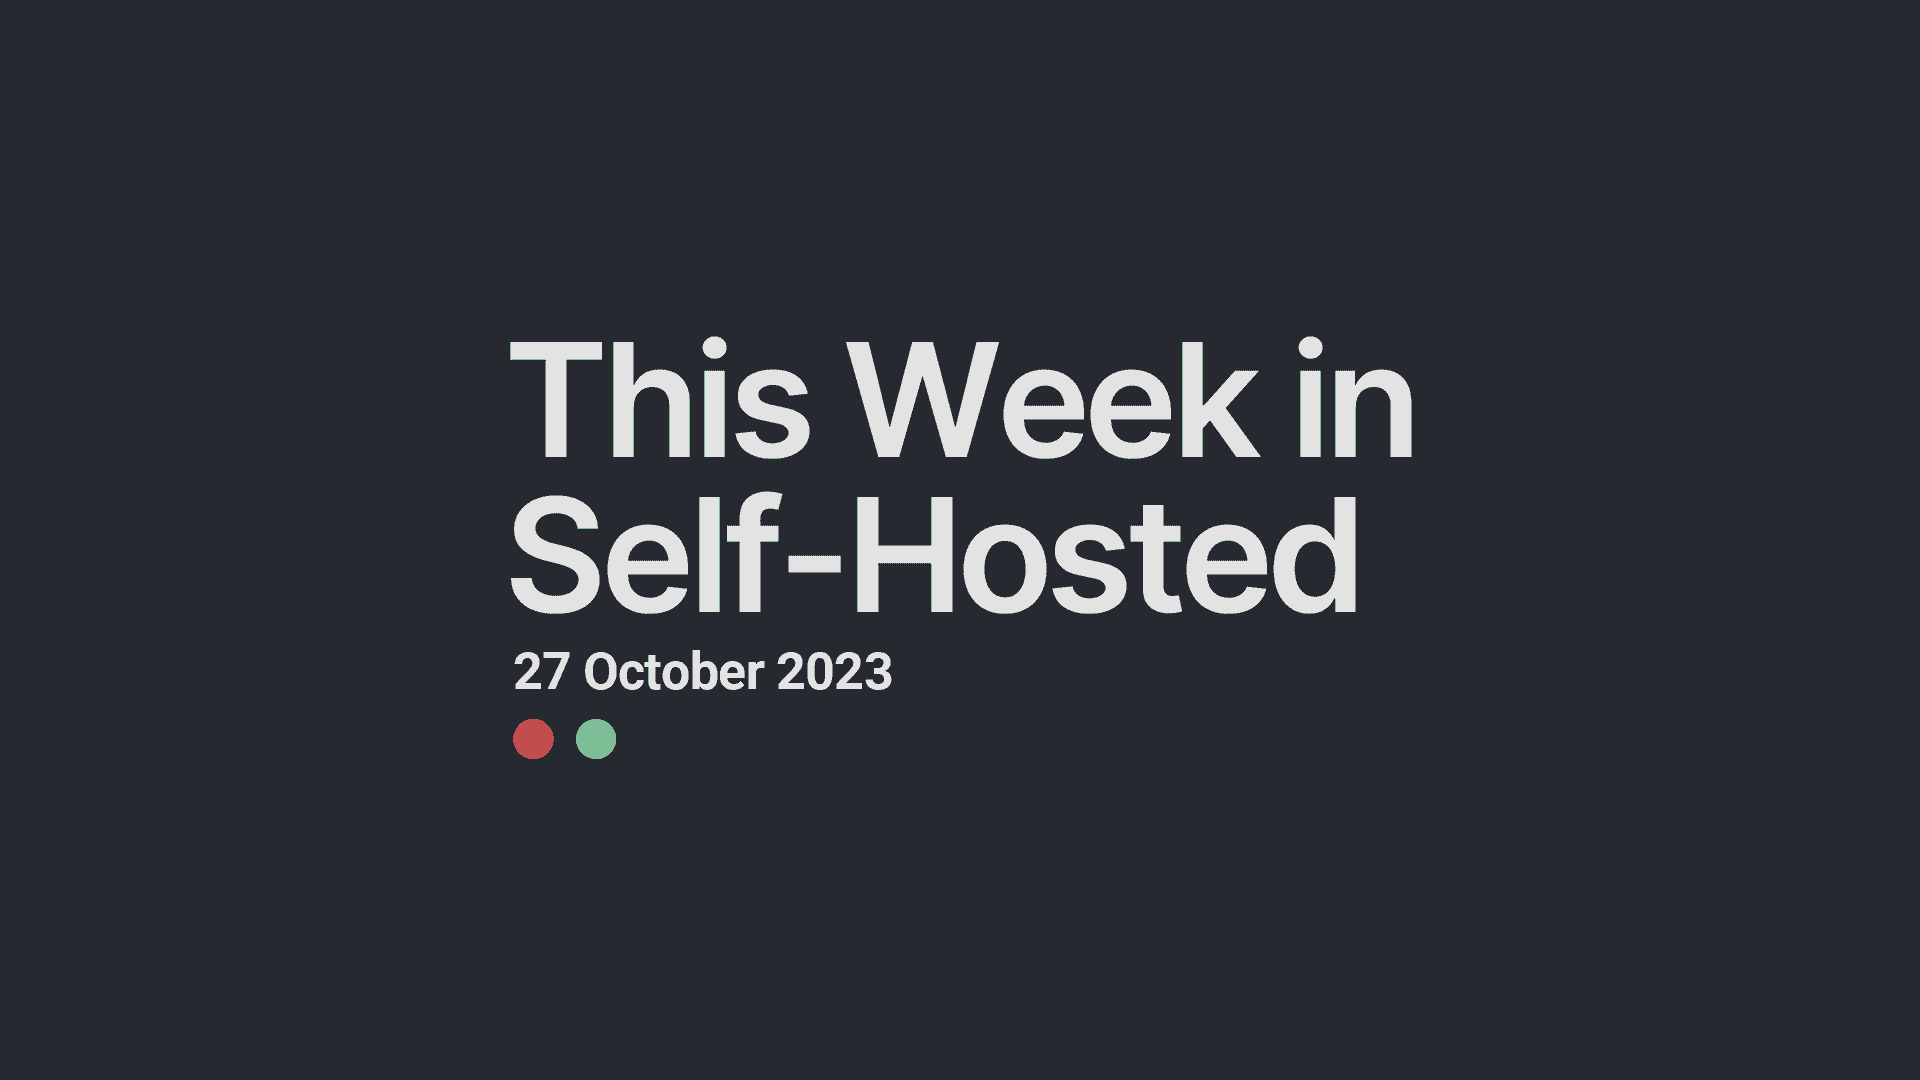 This Week in Self-Hosted (27 October 2023) Post image